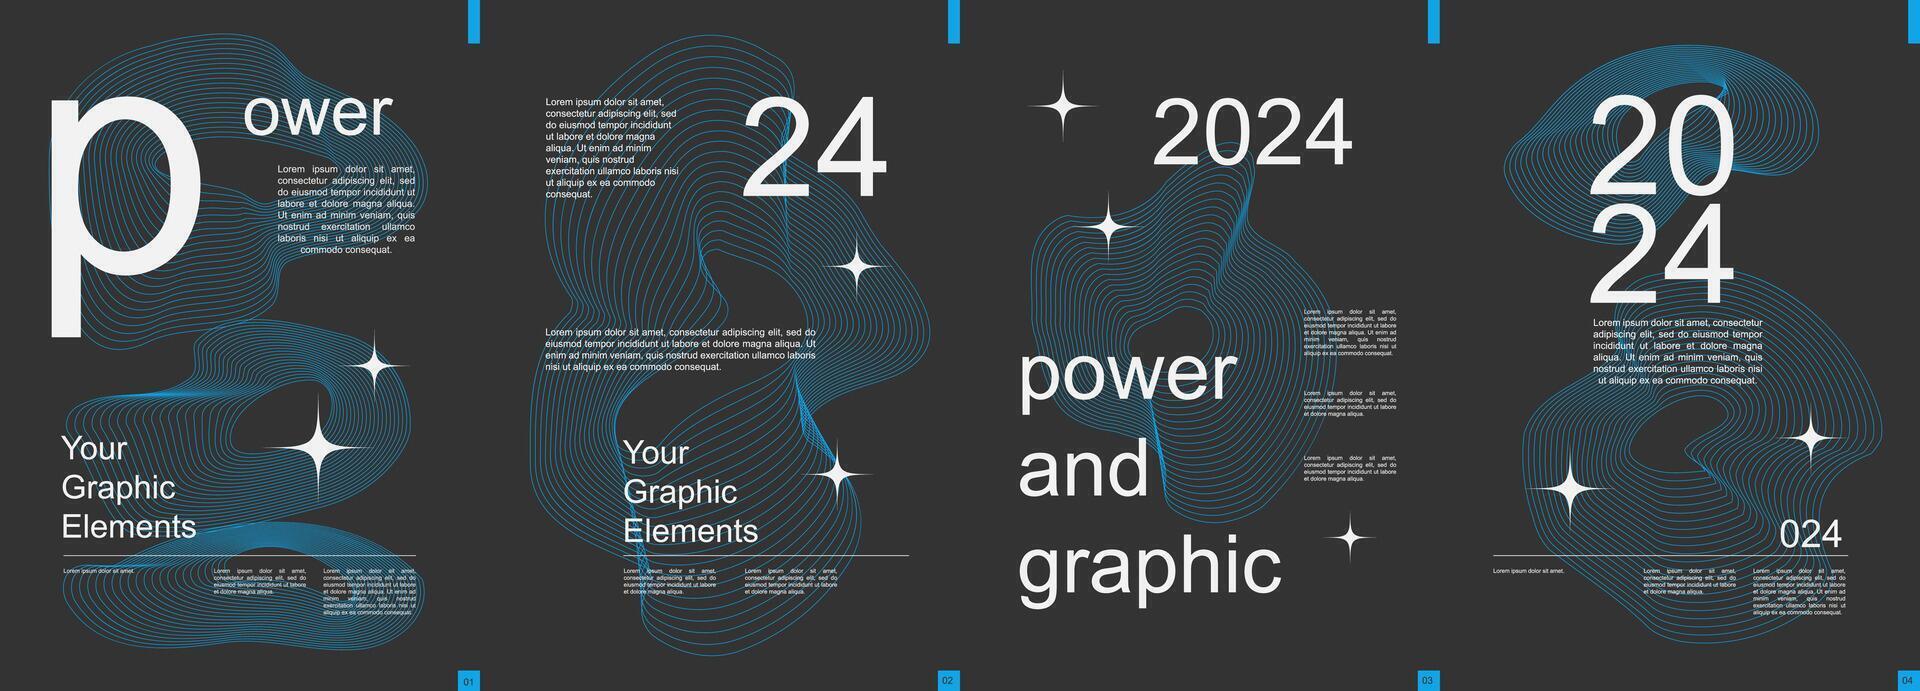 Geometric modern banner with trendy minimalist typography design. Poster templates with dynamic grids of fractal lines in round forms and wavy shapes and text elements on dark. Vector illustration.